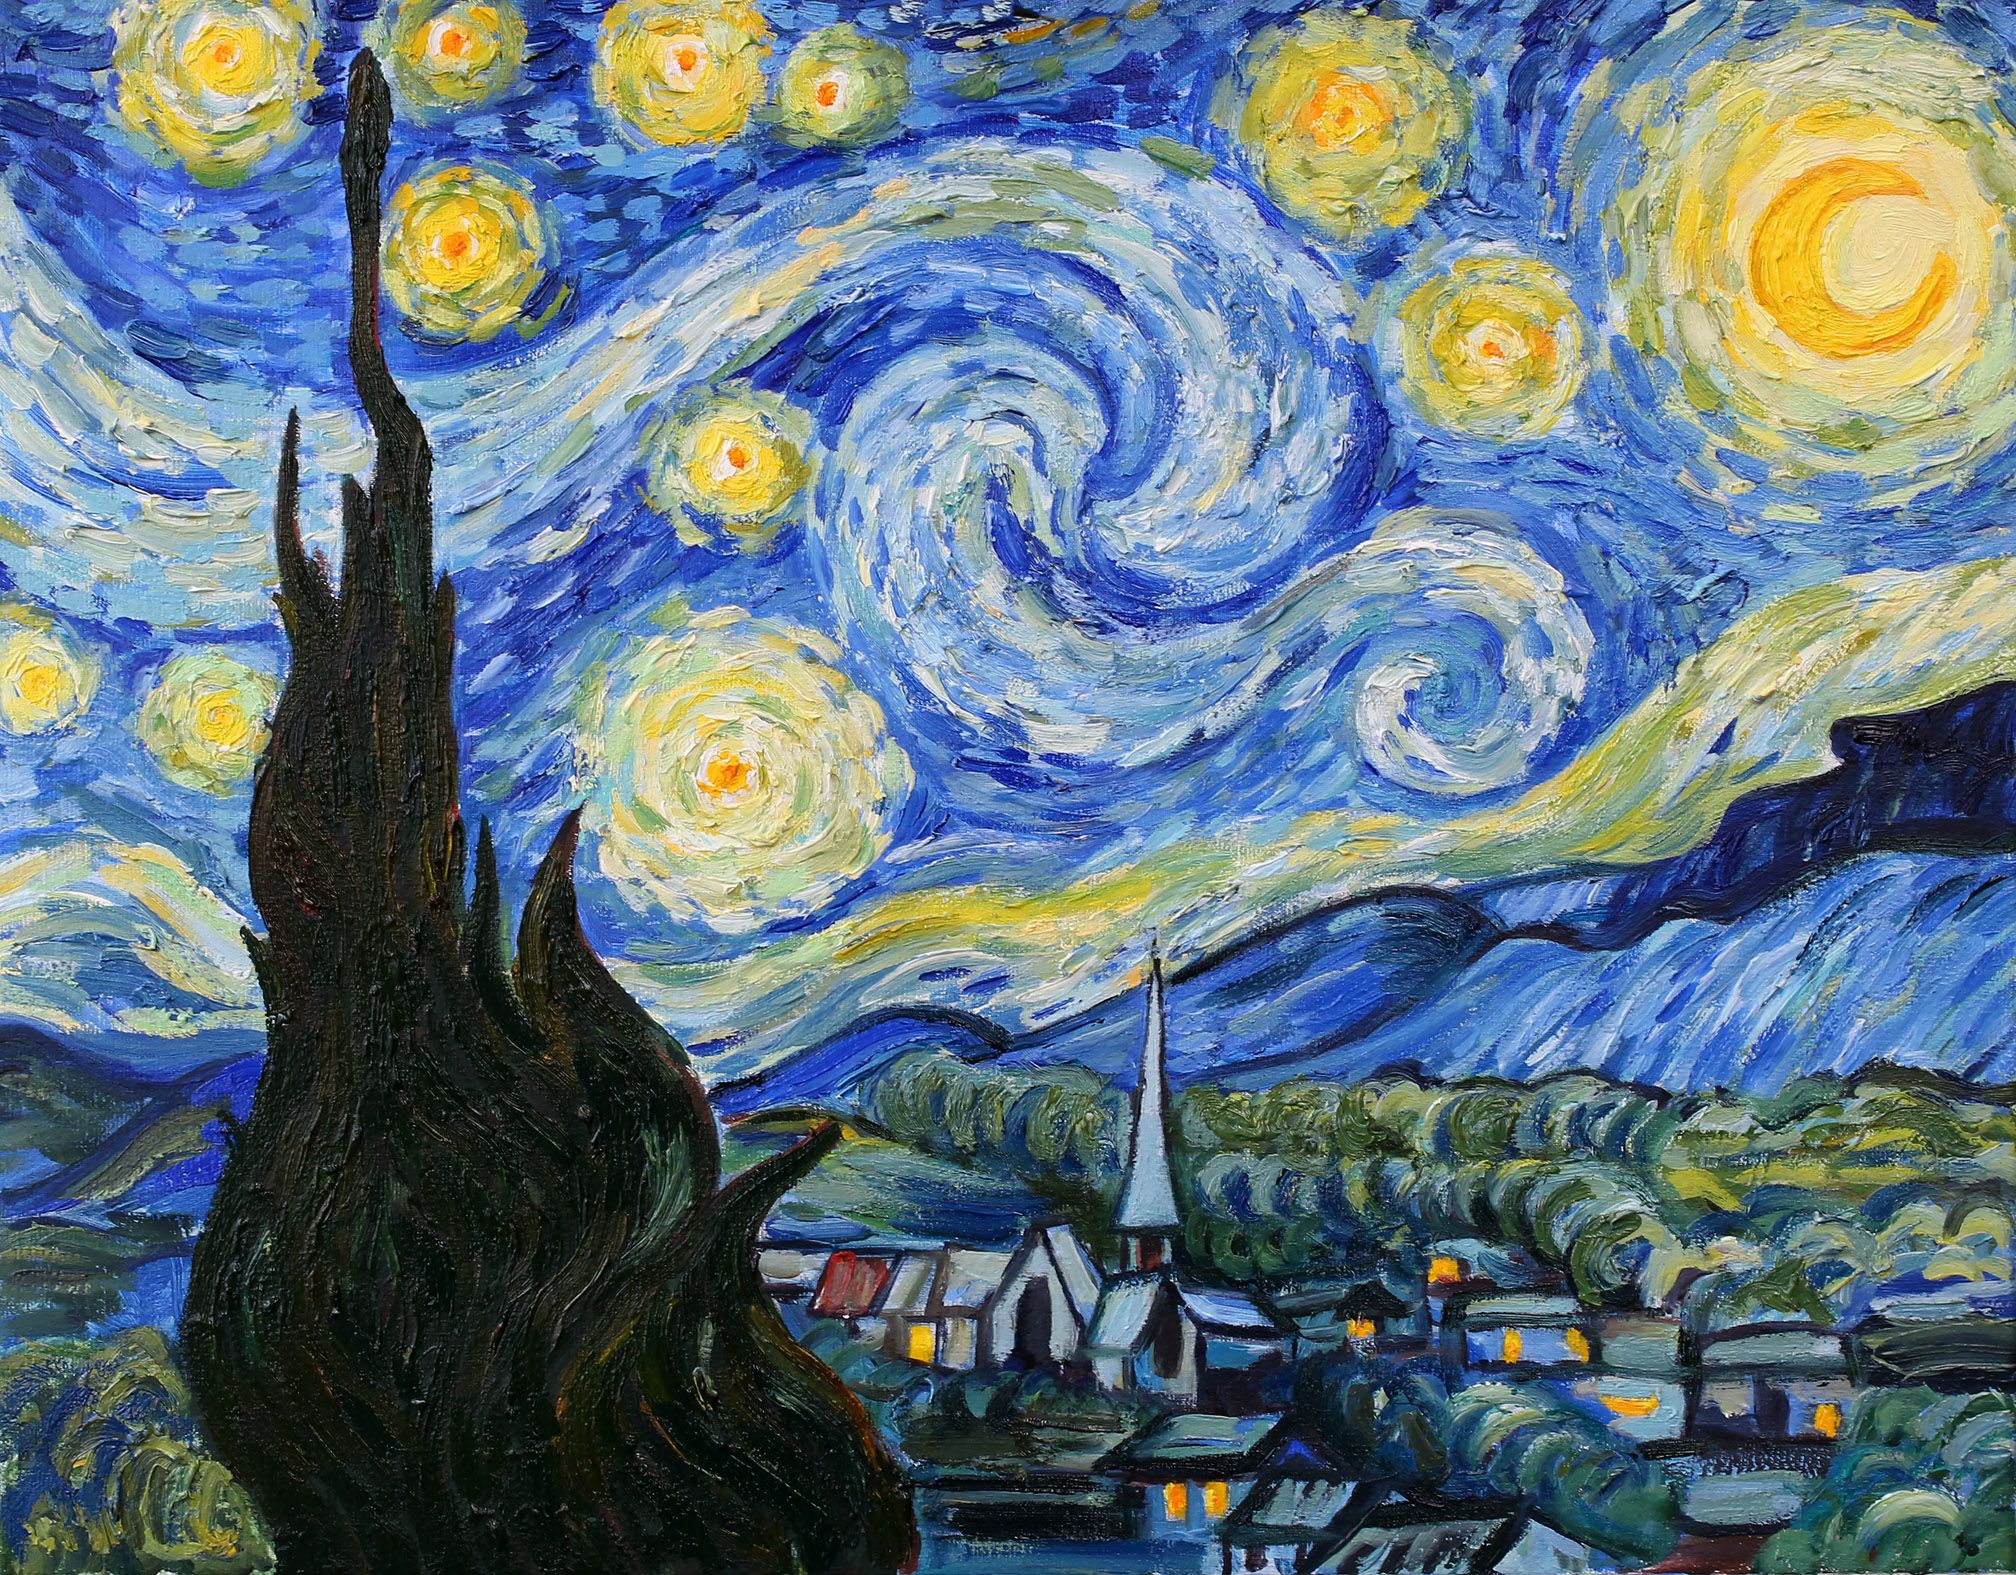 Bolan-Beaty Boogie on Creativity! Marc Speaks with Van Gogh and Artists of the Future!